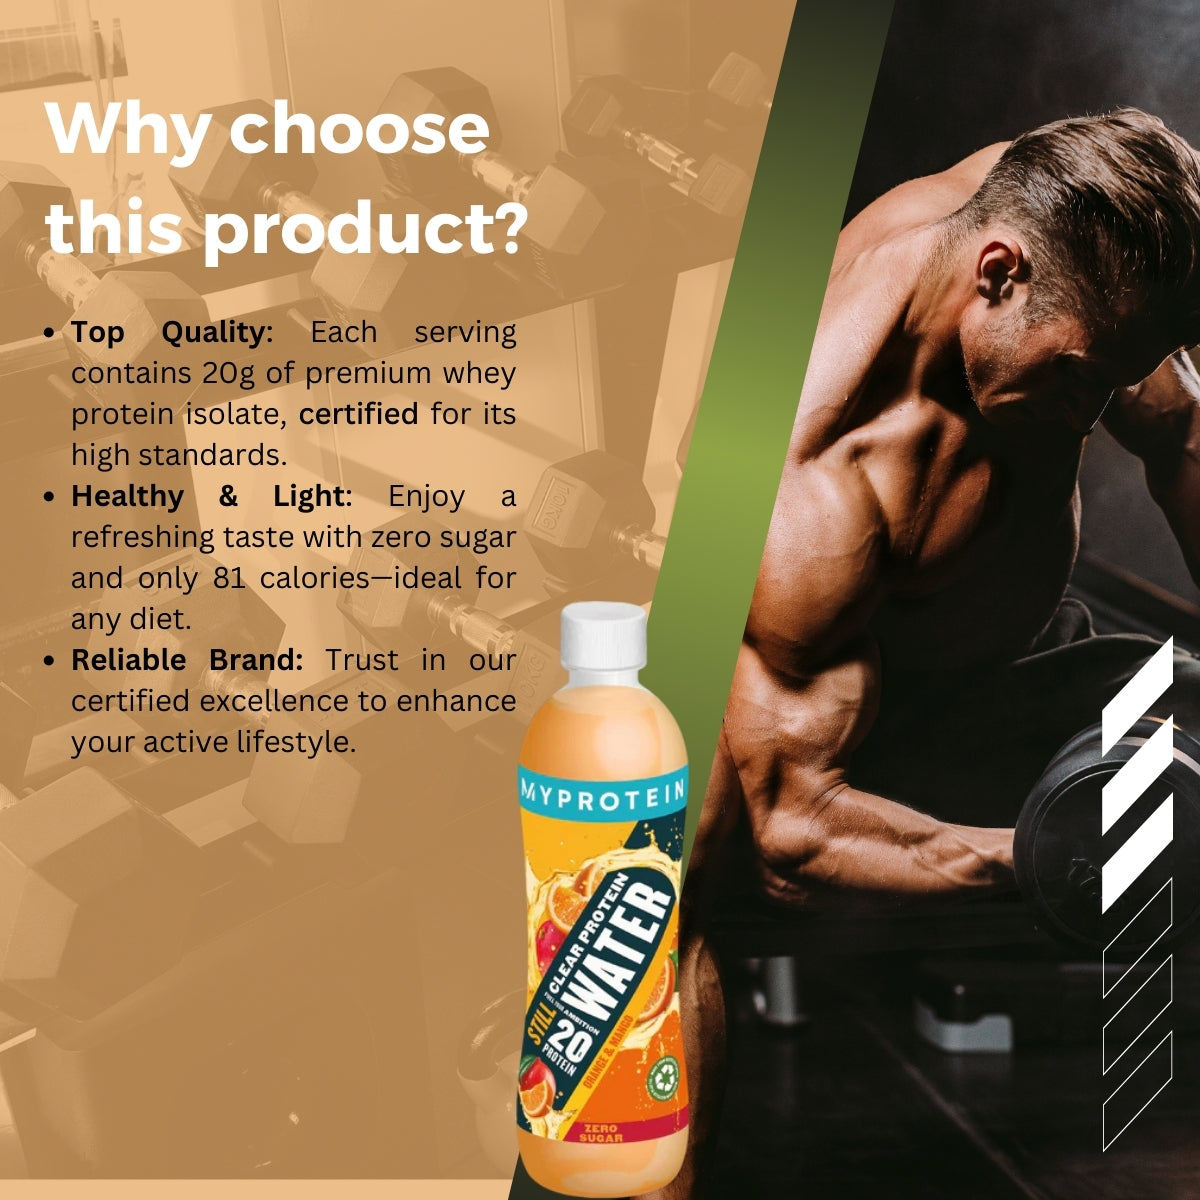 MyProtein Clear Protein Water, High Protein Drink - Why choose